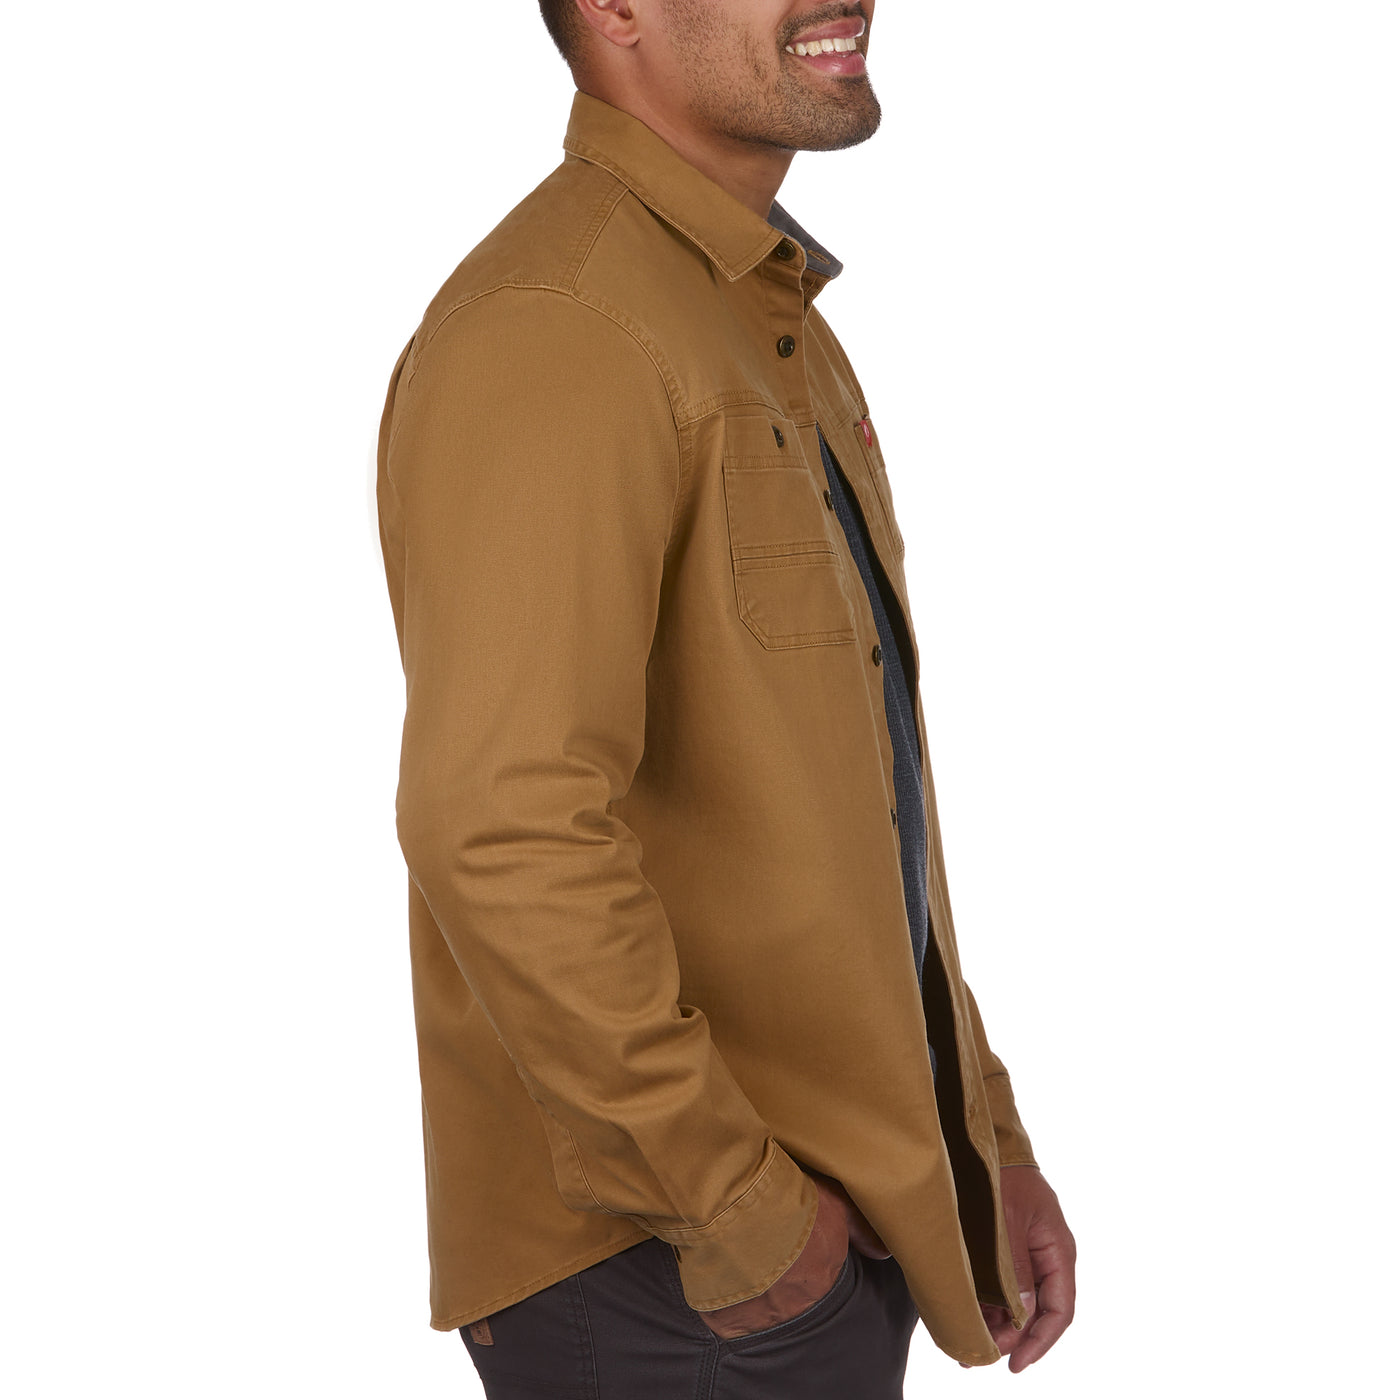 Long-Sleeve Stretch Twill Work Shirt – The American Outdoorsman